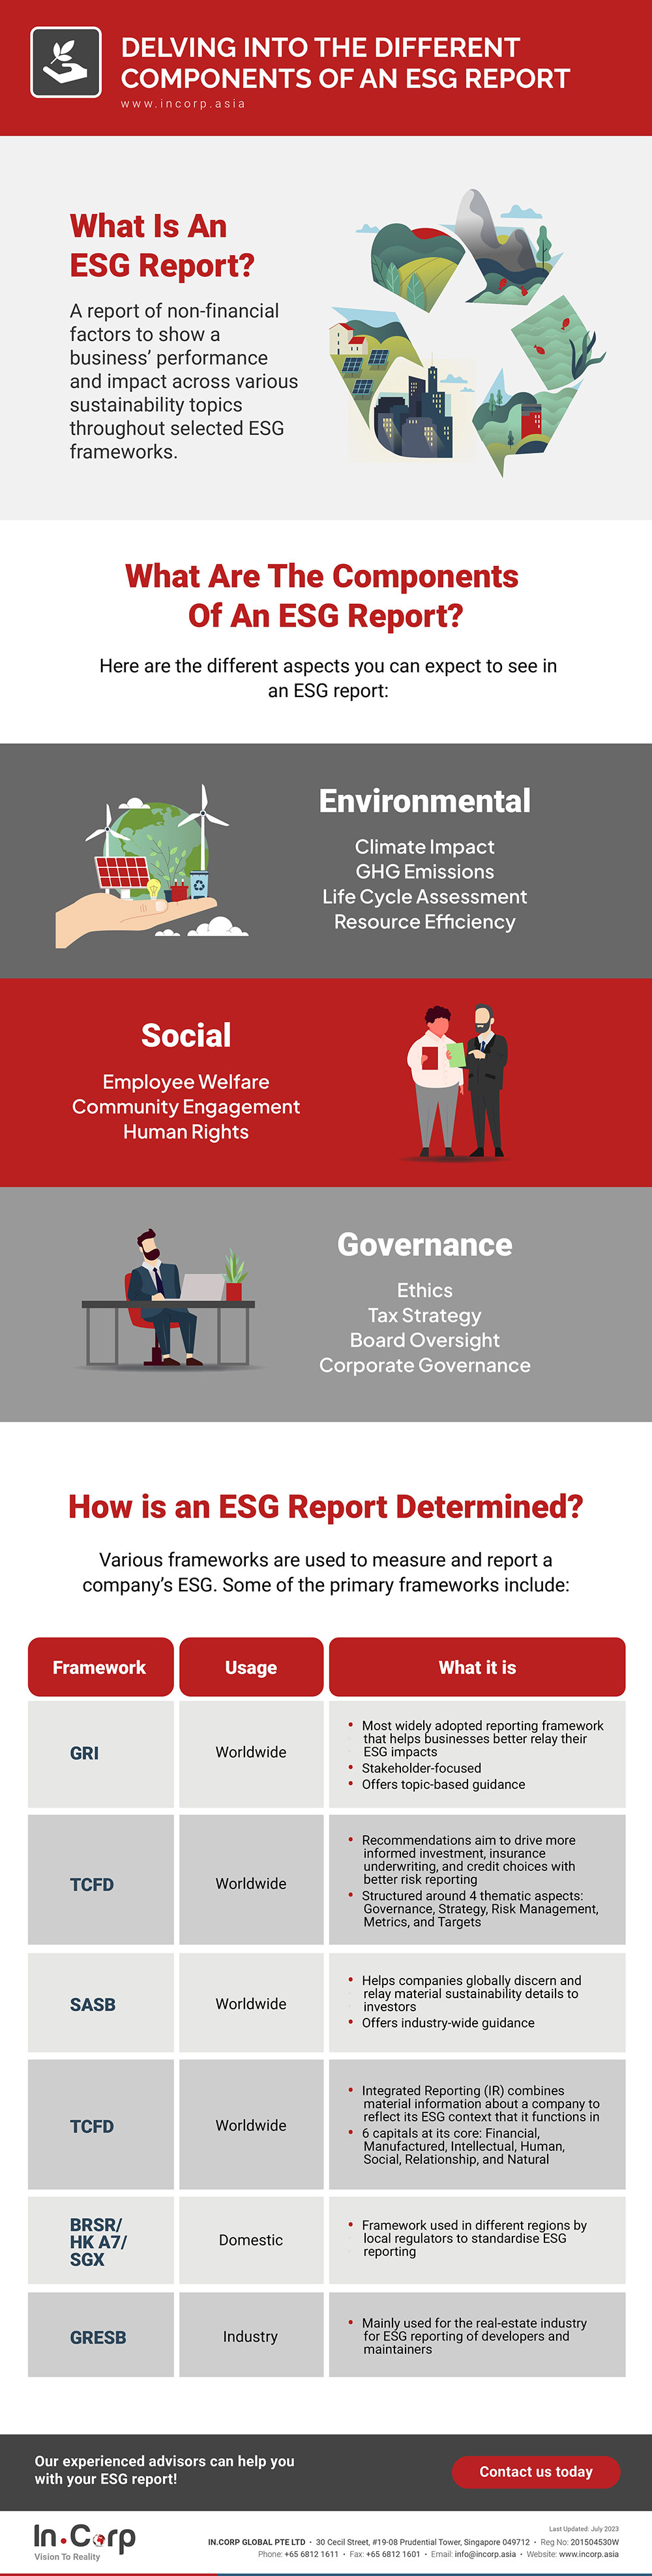 ESG Reporting 101: What Are the Components of an ESG Report